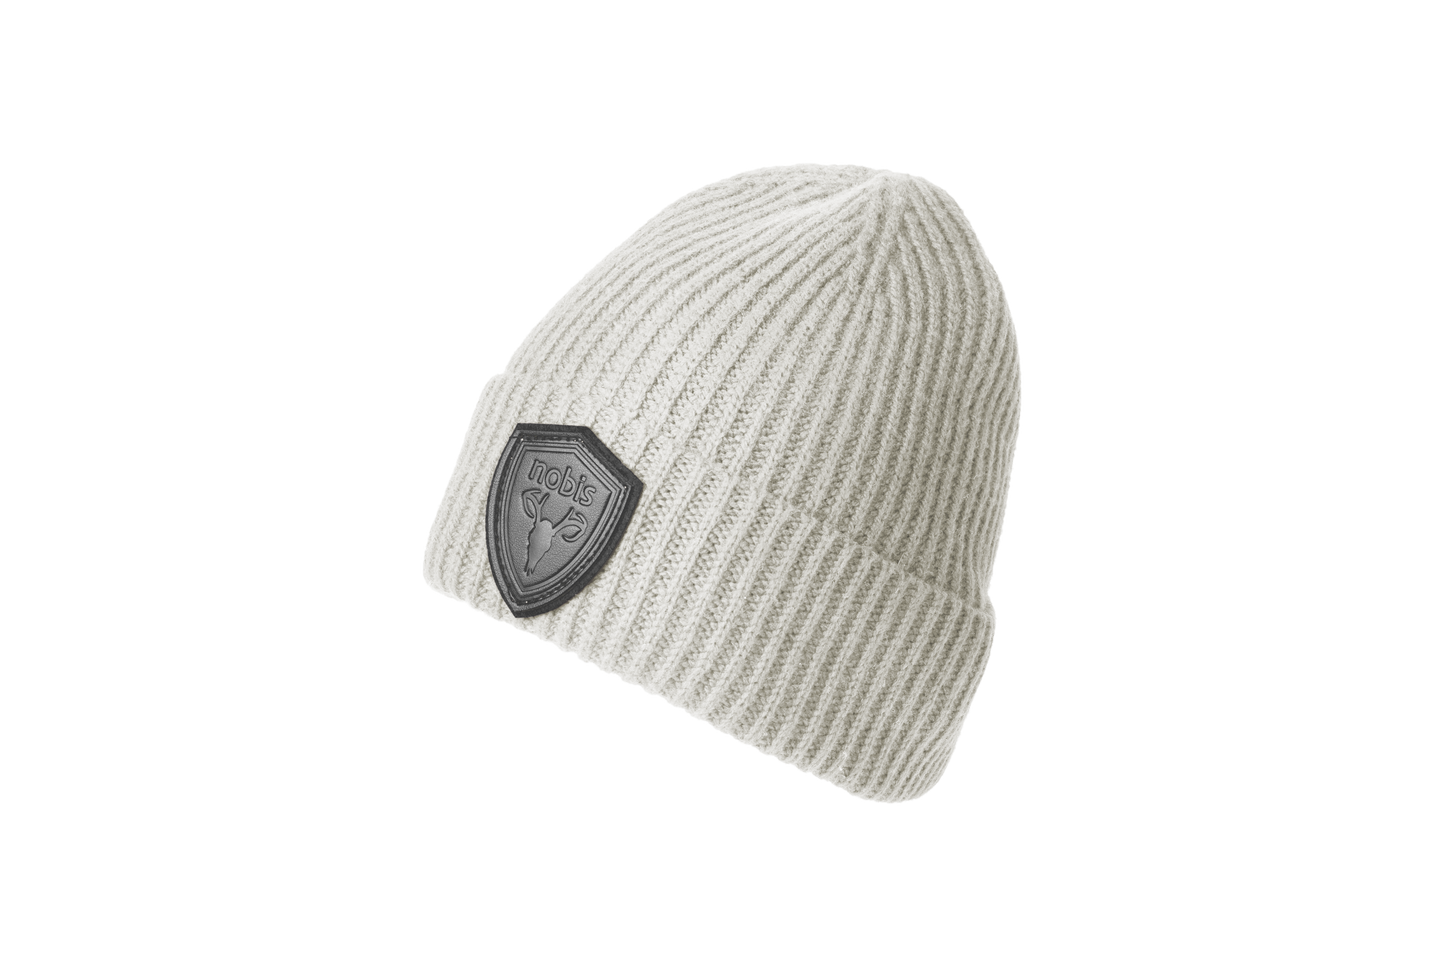 Emer Unisex Tailored Chunky Knit Beanie in extra fine merino wool blend, and black leather Nobis shield logo on cuff, in Wheat